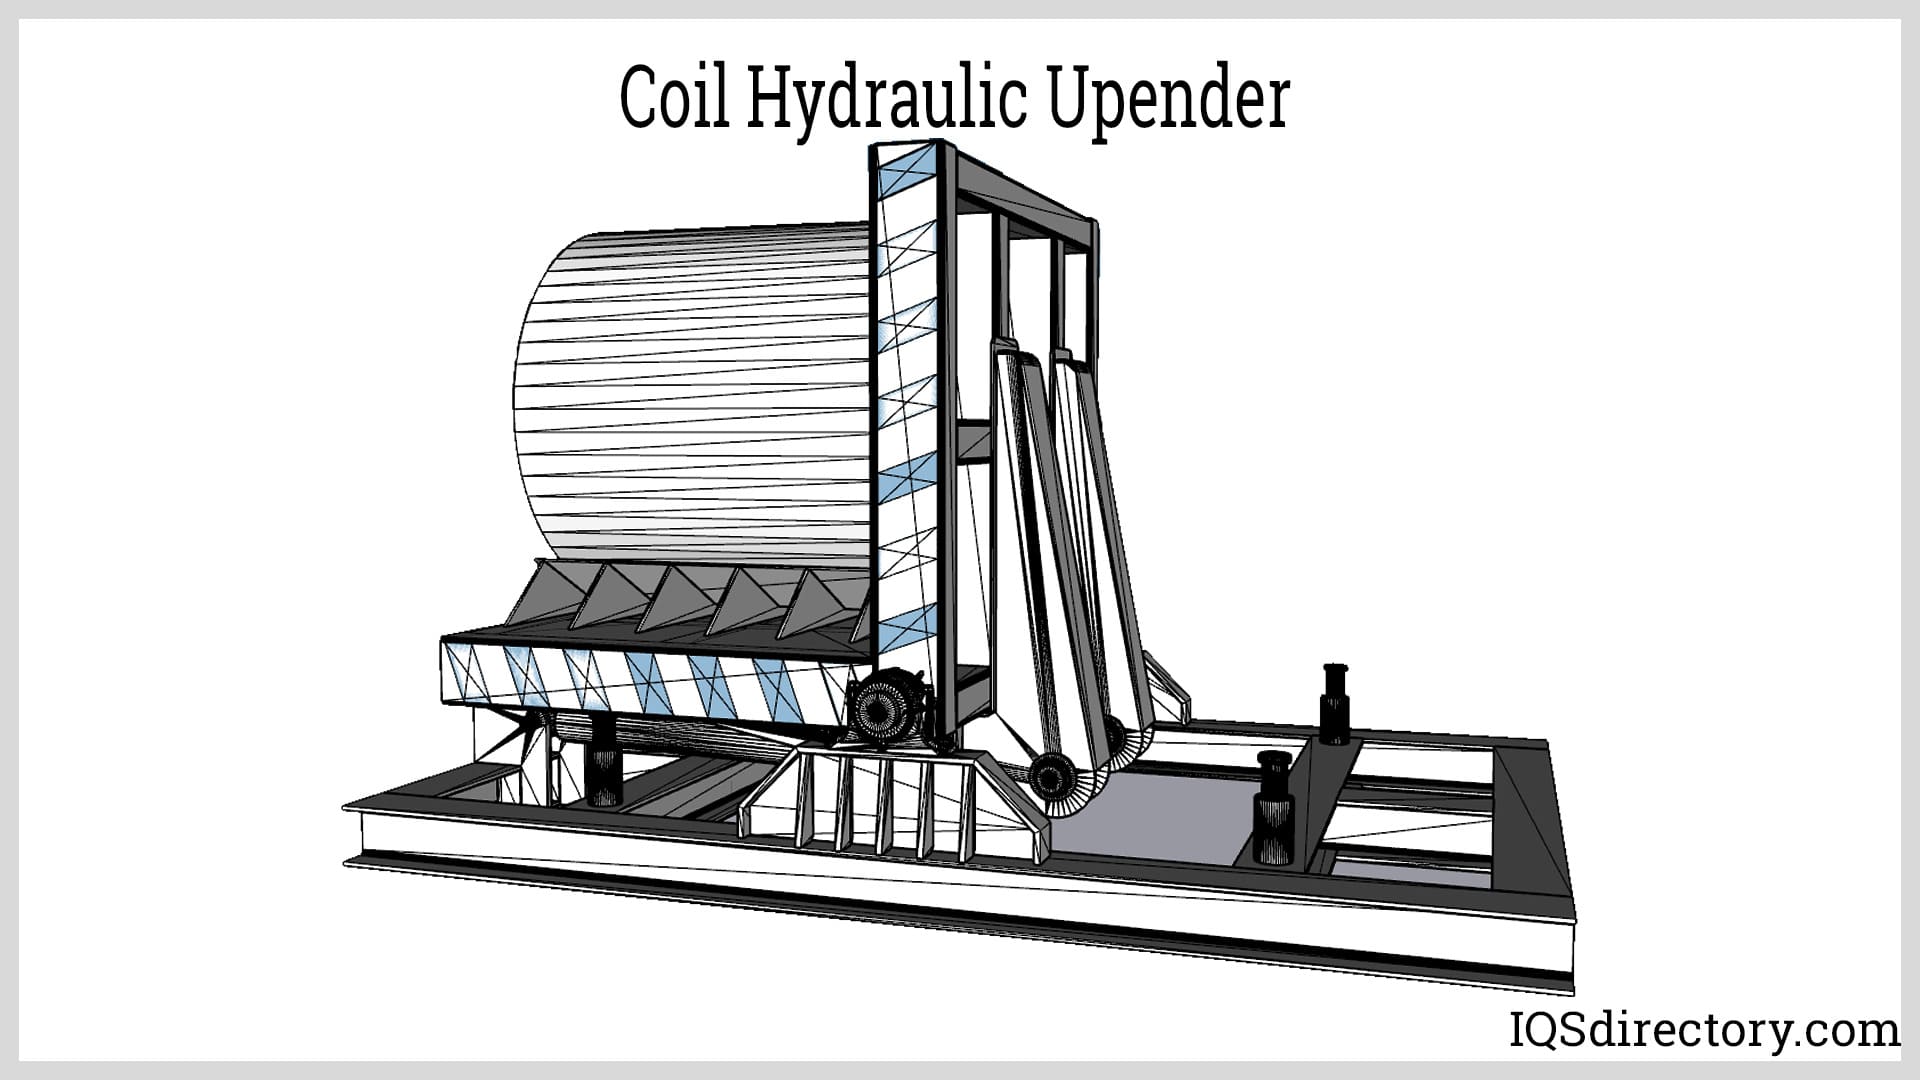 Coil Hydraulic Upender